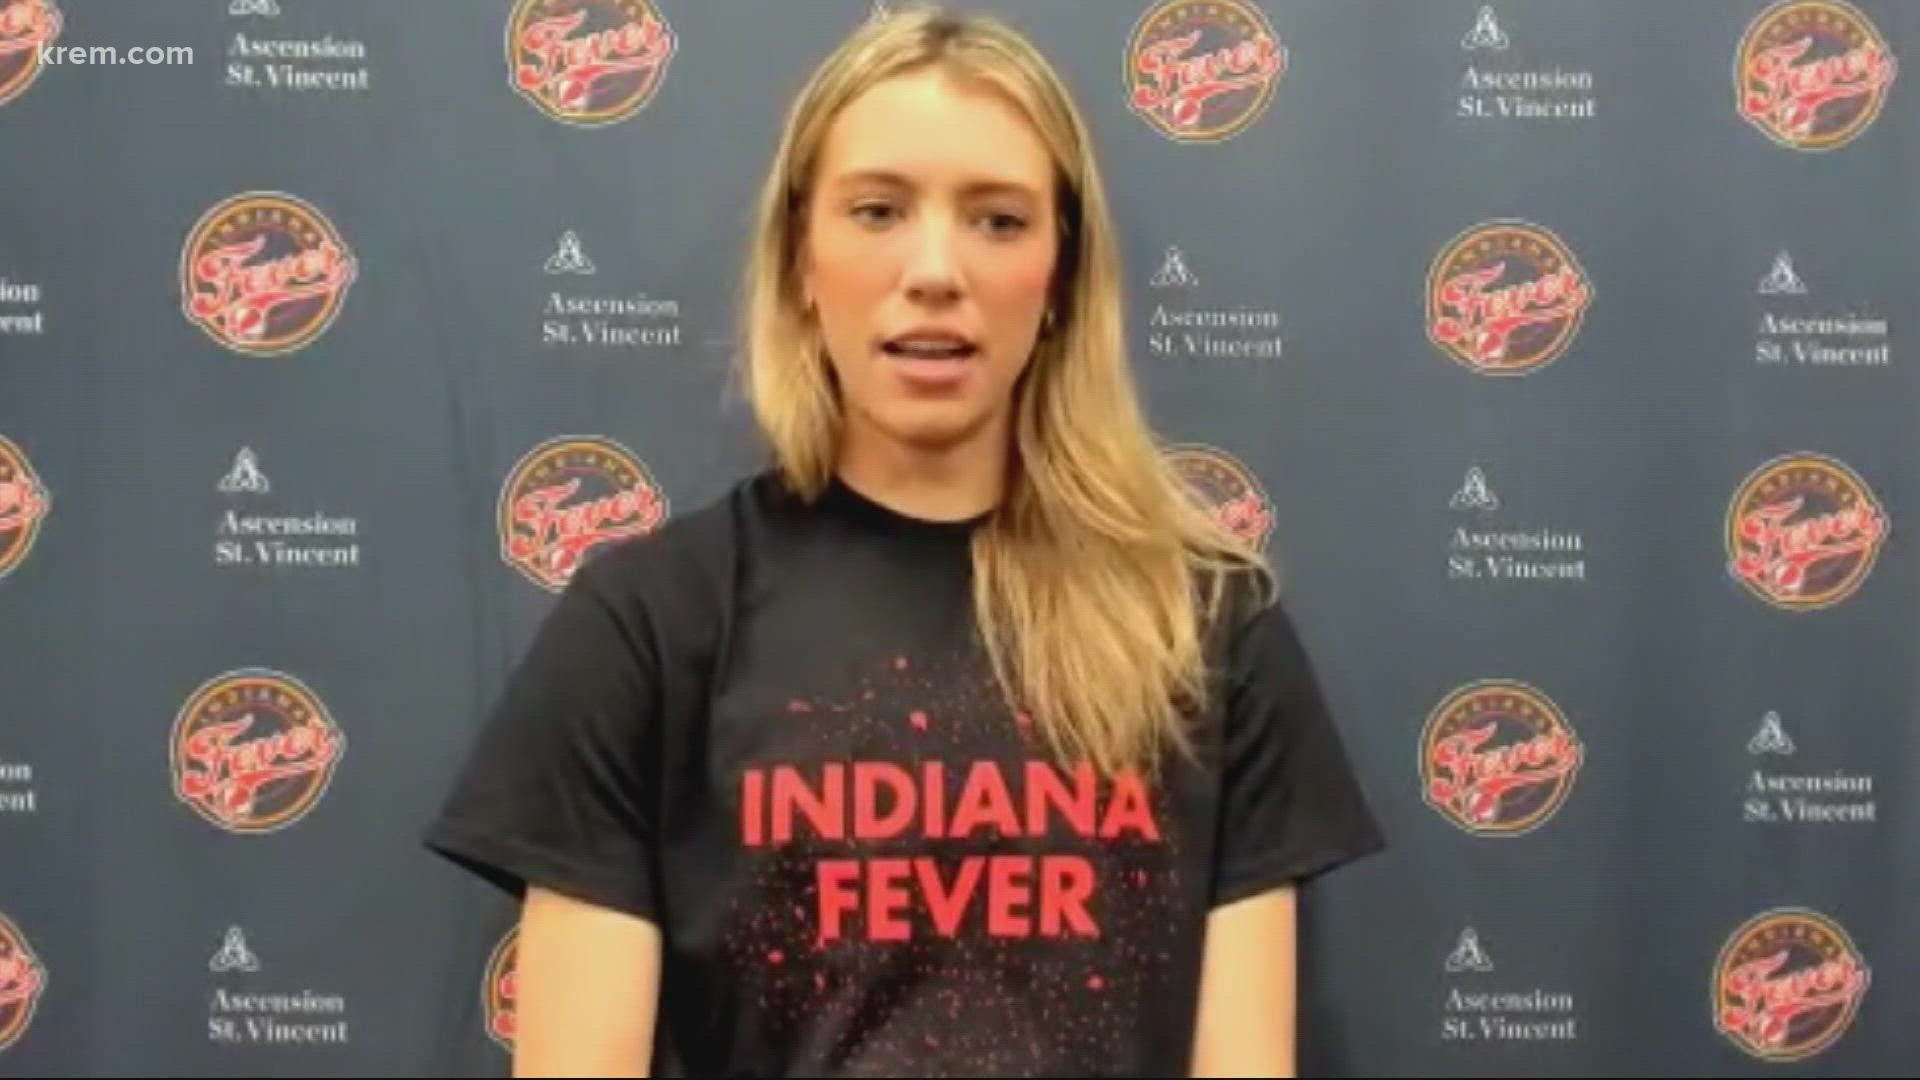 Hull was picked sixth overall in this year's WNBA draft by the Indiana Fever.